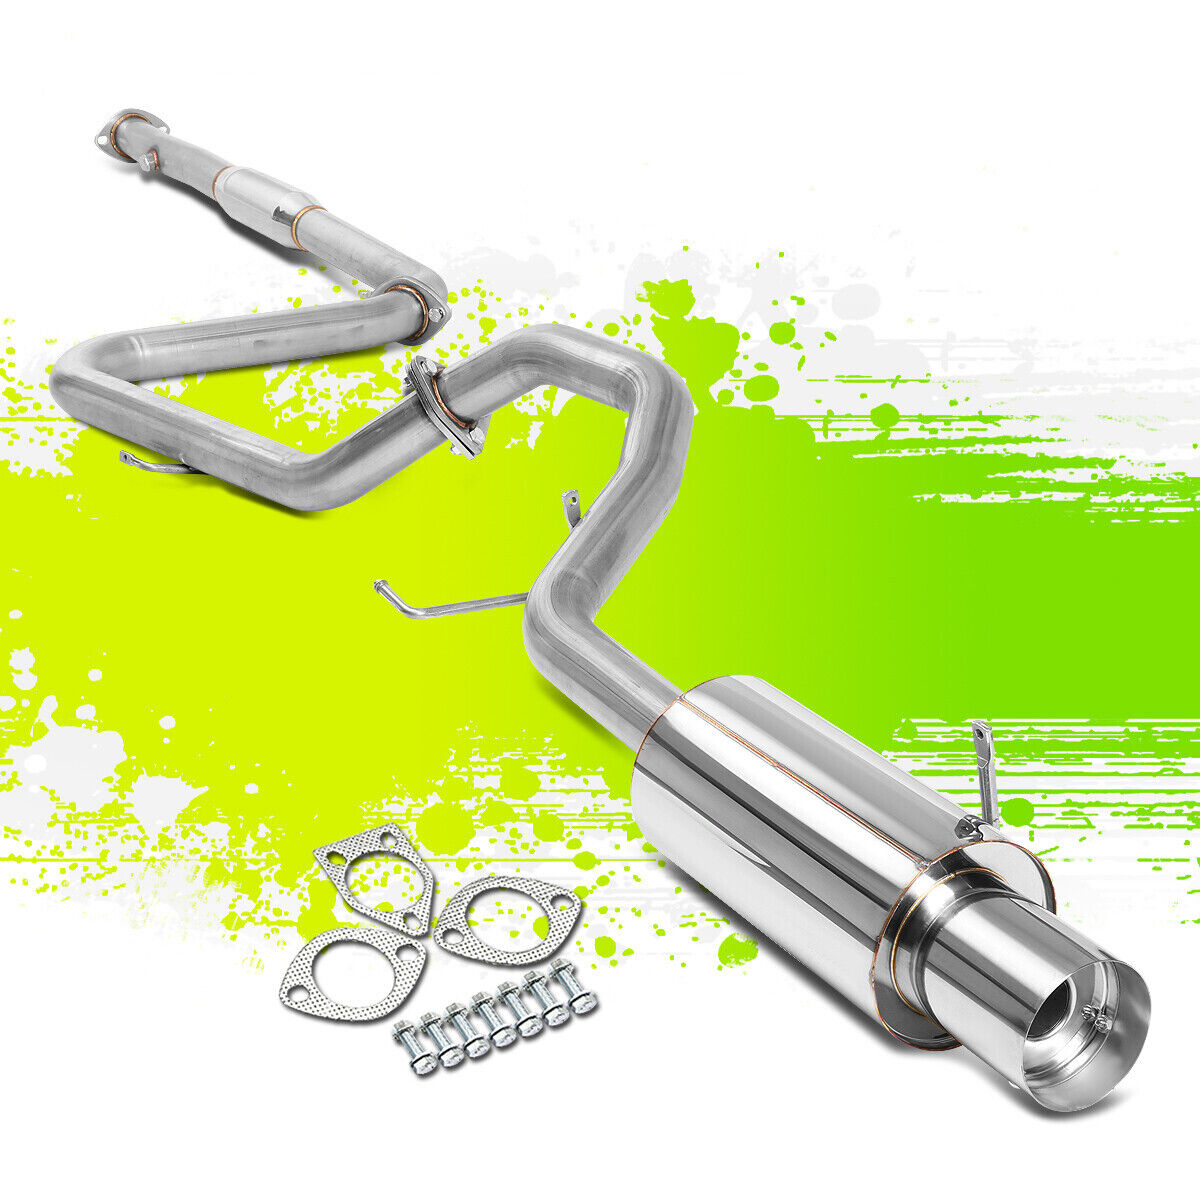 FOR MIT GALANT 2.4L L4 STAINLESS STEEL CATBACK EXHAUST SYSTEM 4.5